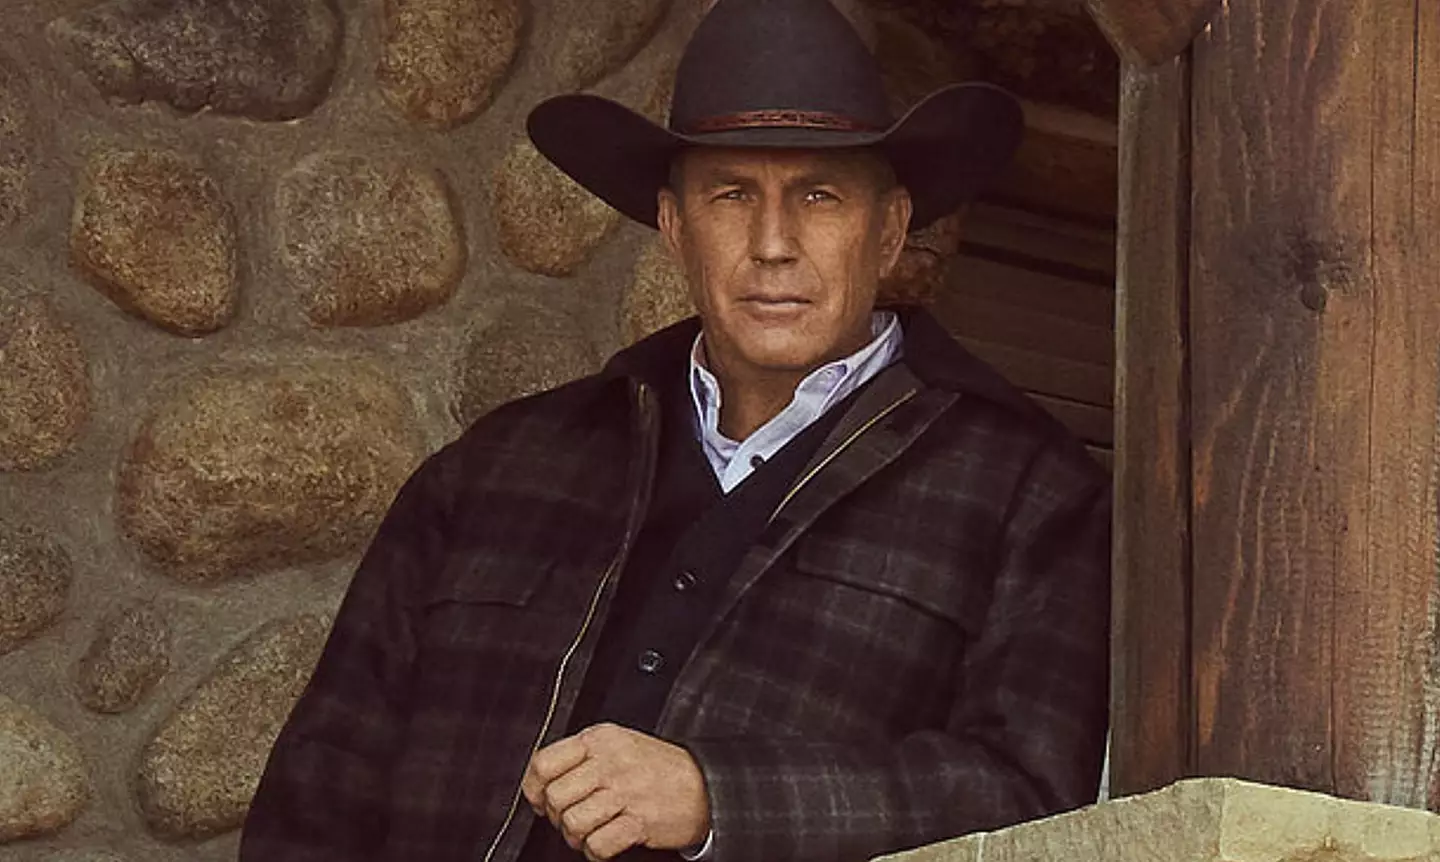 Yellowstone star Kevin Costner has been told he must pay $129k a month in child support.